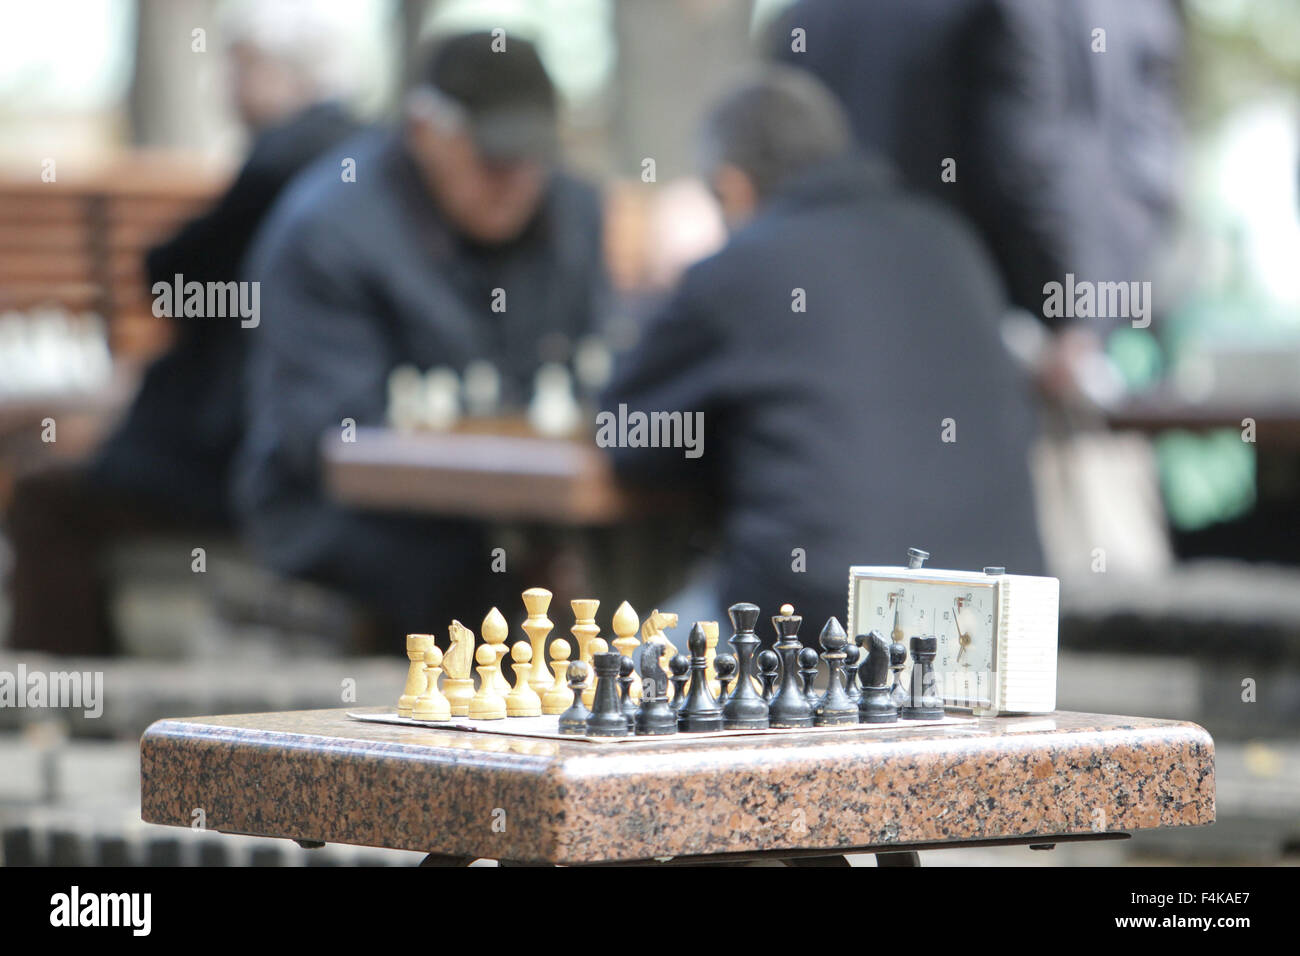 Kiev, Ukraine. 19th Oct, 2015. The Shevchenko Park is the most popular place in Kiev. One of the park's zests is a ground with tables where the chess players, domino, backgammon and other board games lovers compete 24/7. © Nazar Furyk/ZUMA Wire/Alamy Live News Stock Photo